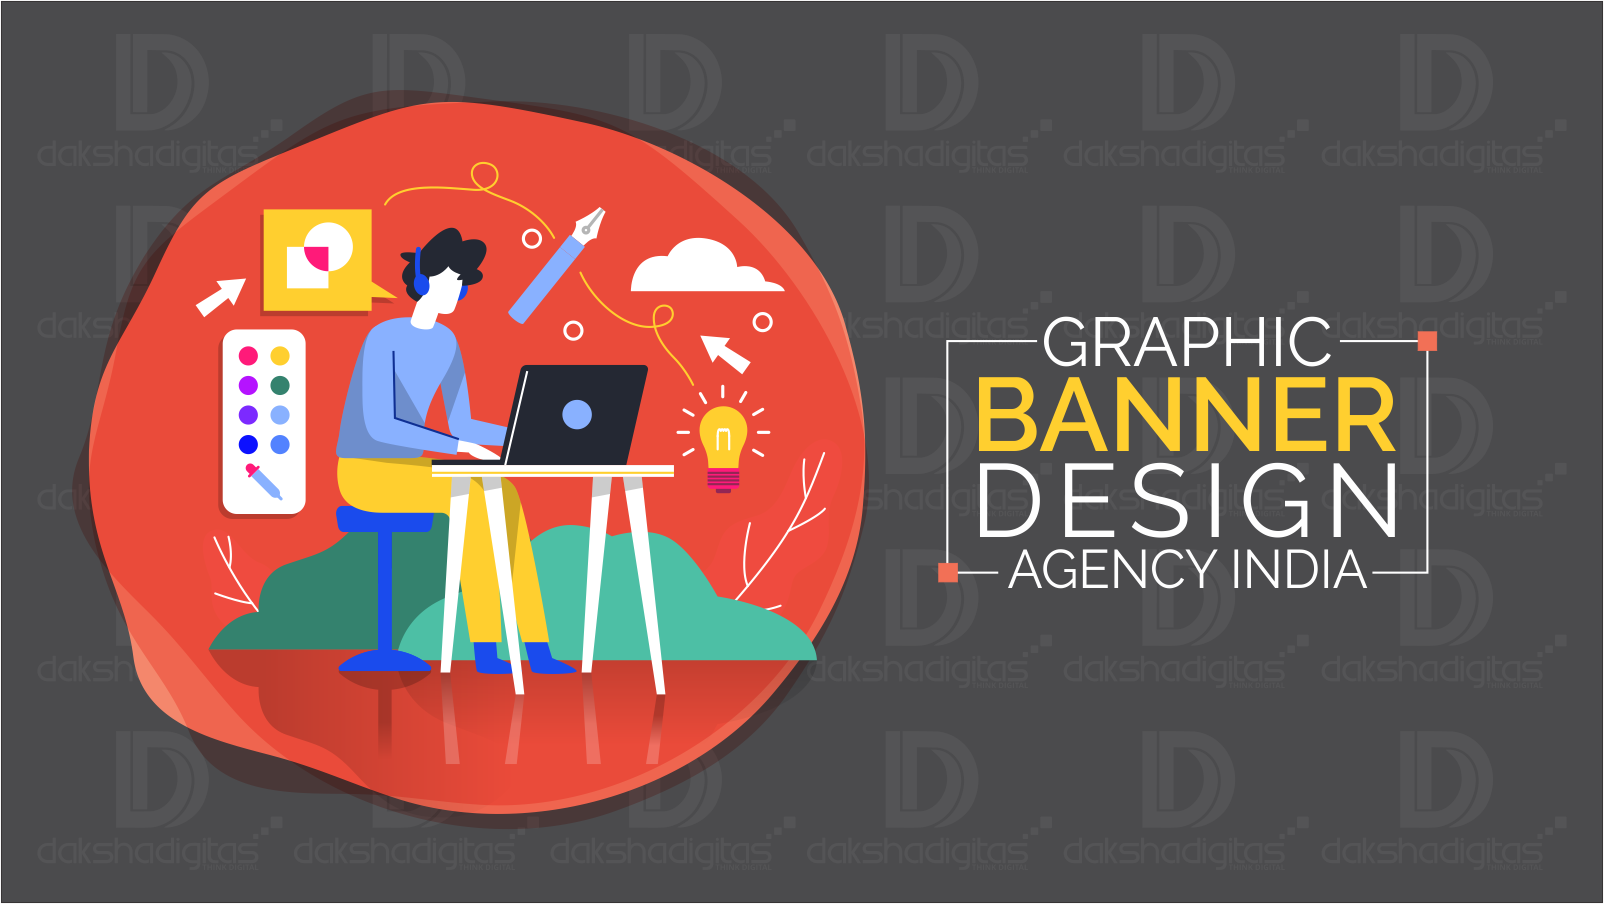 Graphic Banner Design Agency India